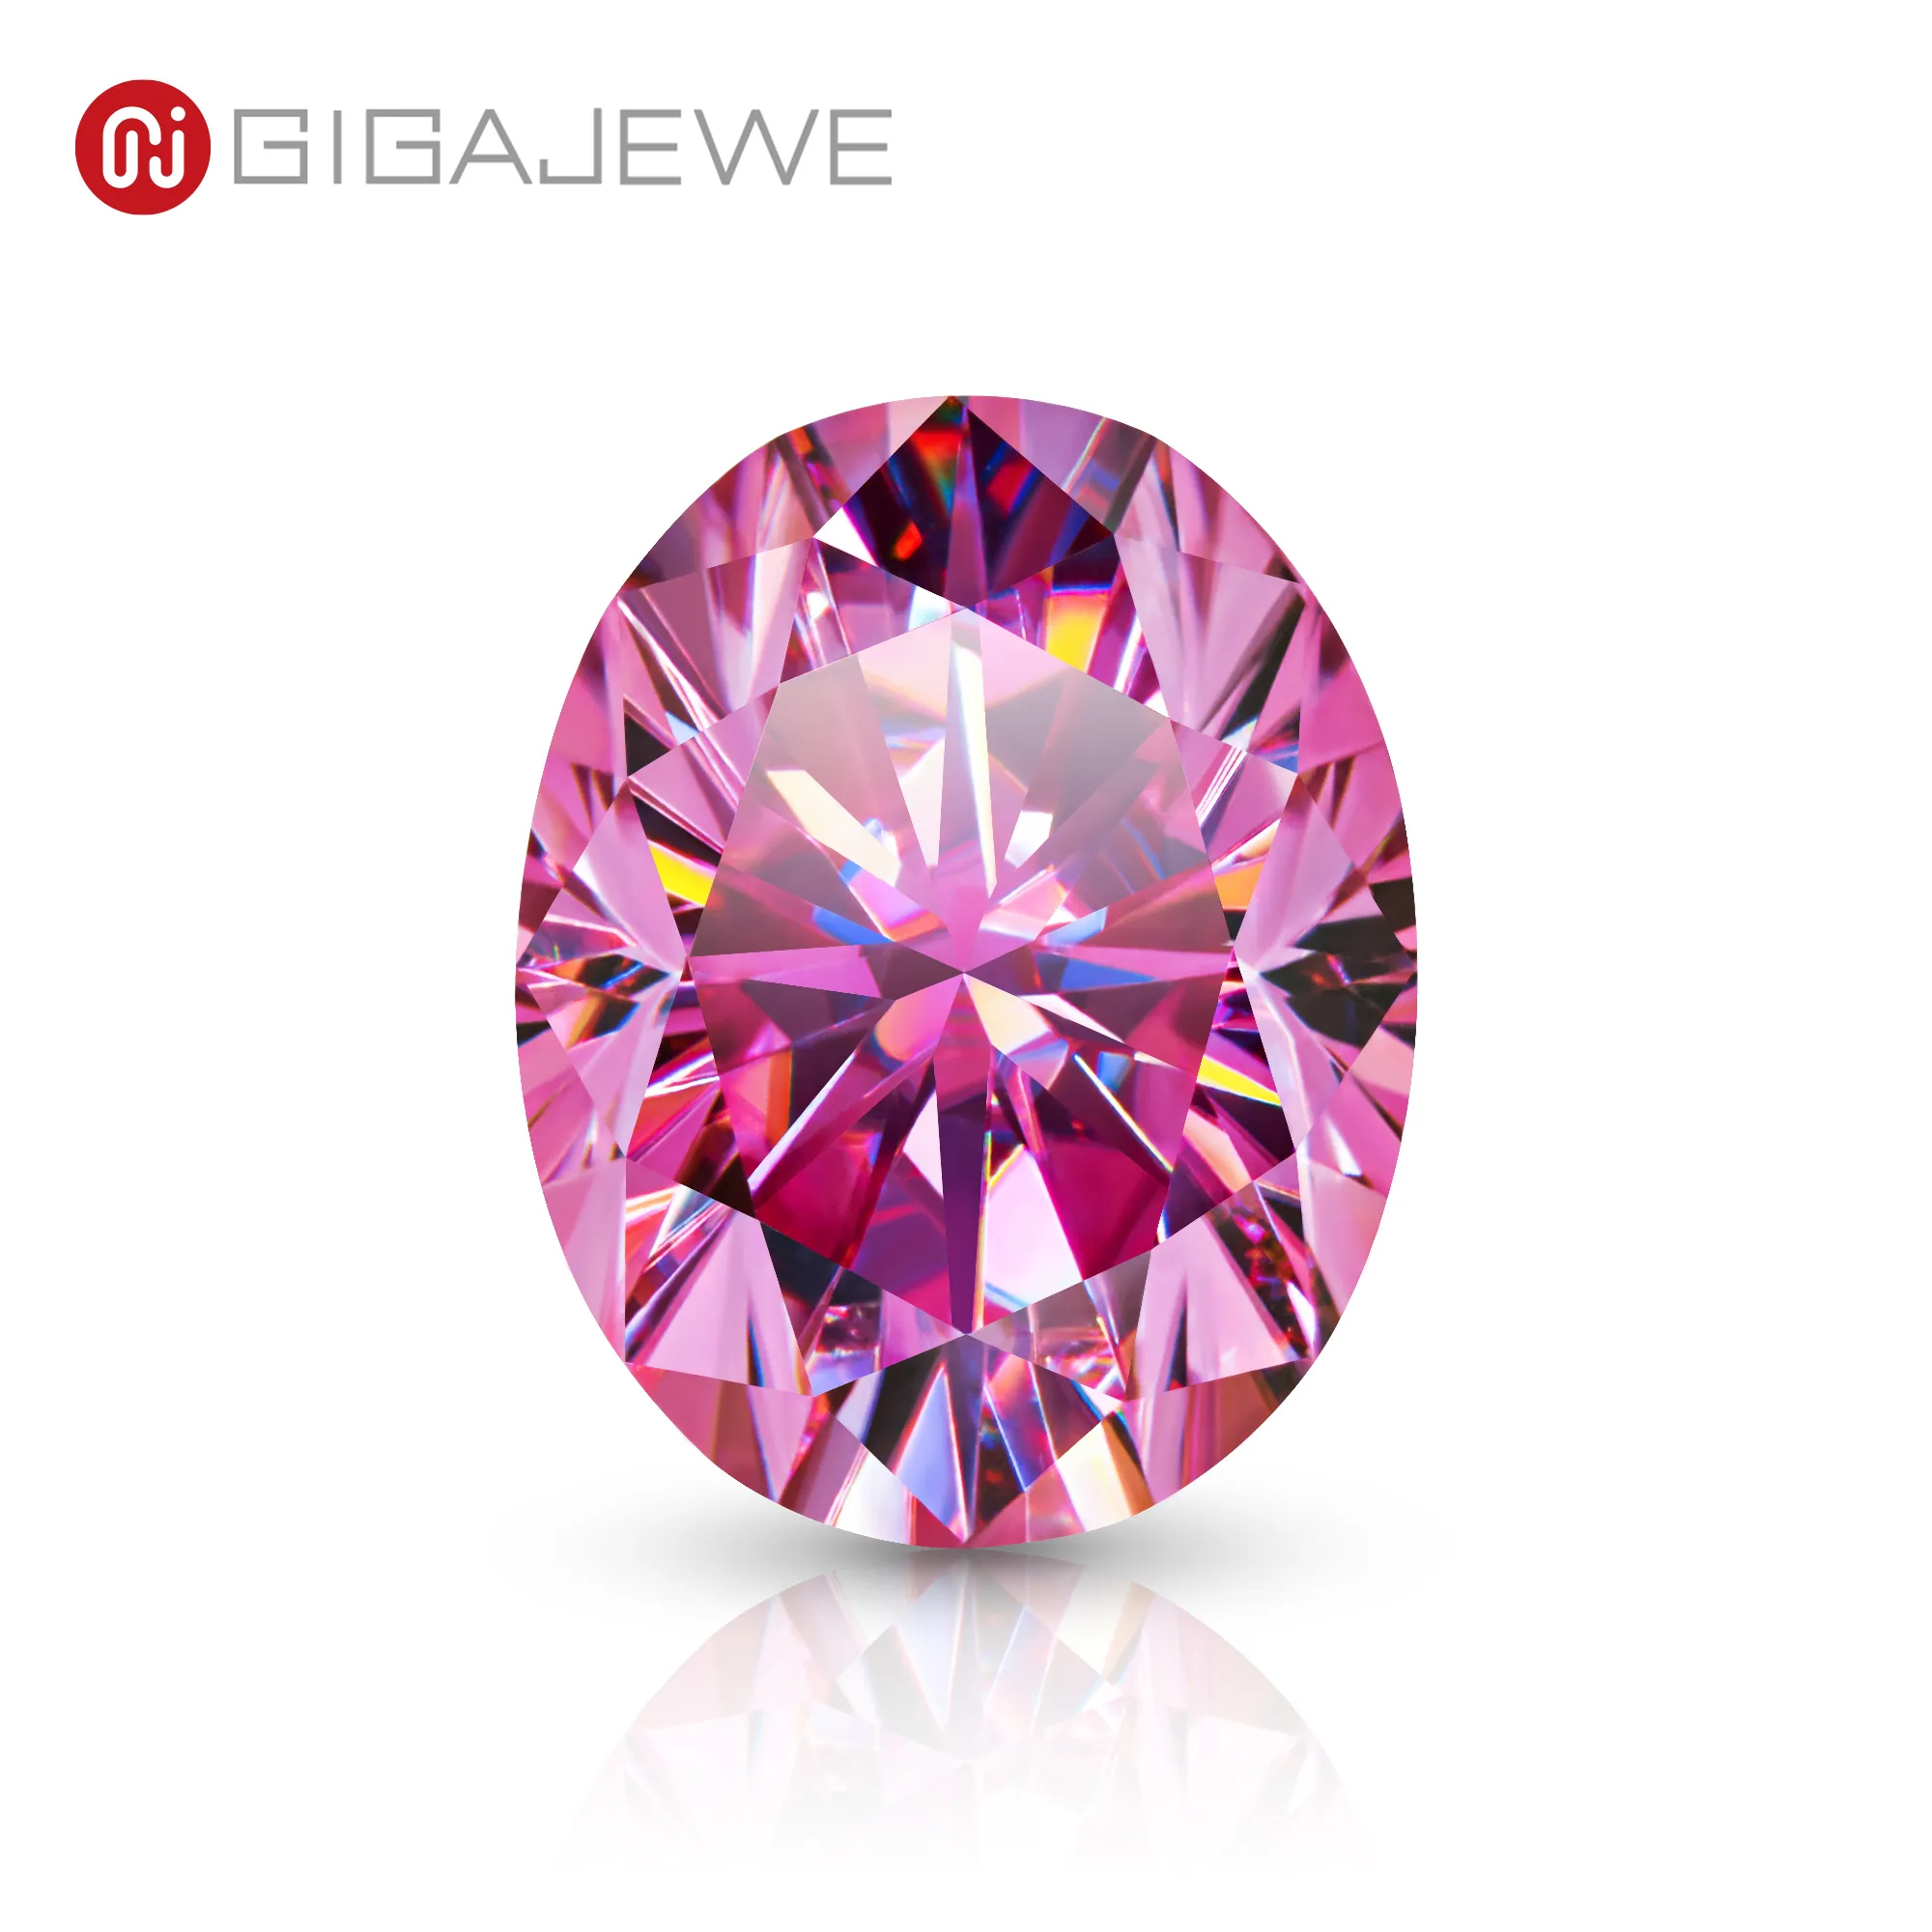 GIGAJEWE Pink Color Oval cut VVS1 moissanite diamond 5x7mm-10x14mm for jewelry making